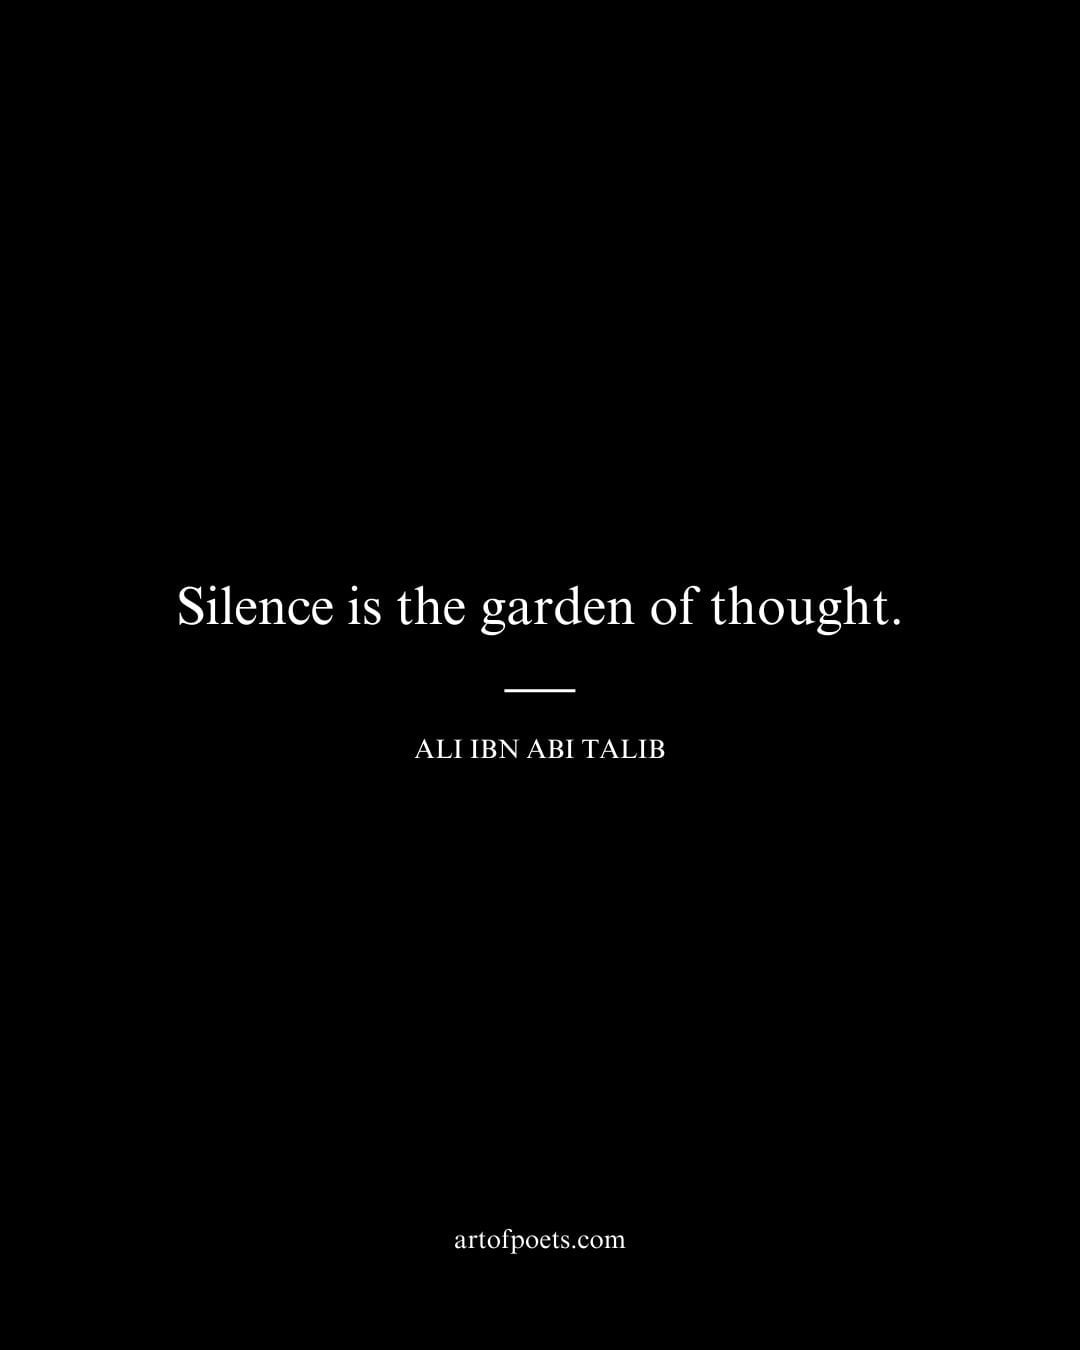 Silence is the garden of thought